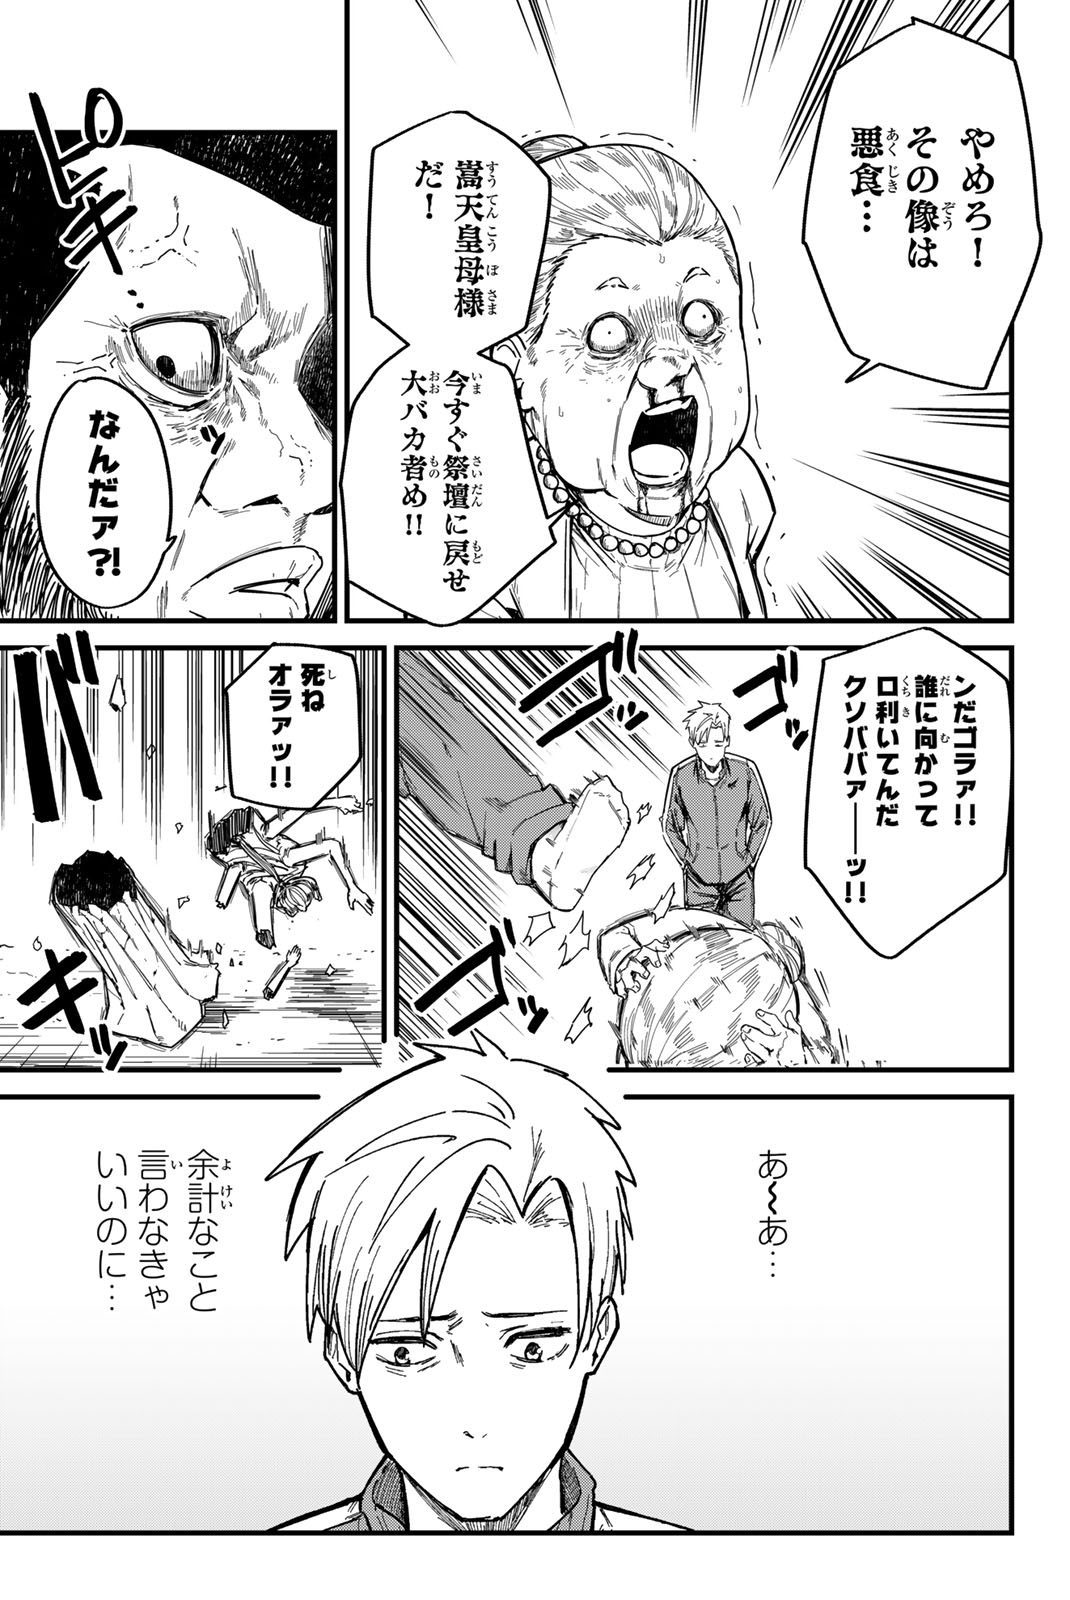 REDRUM 第1.1話 - Page 5